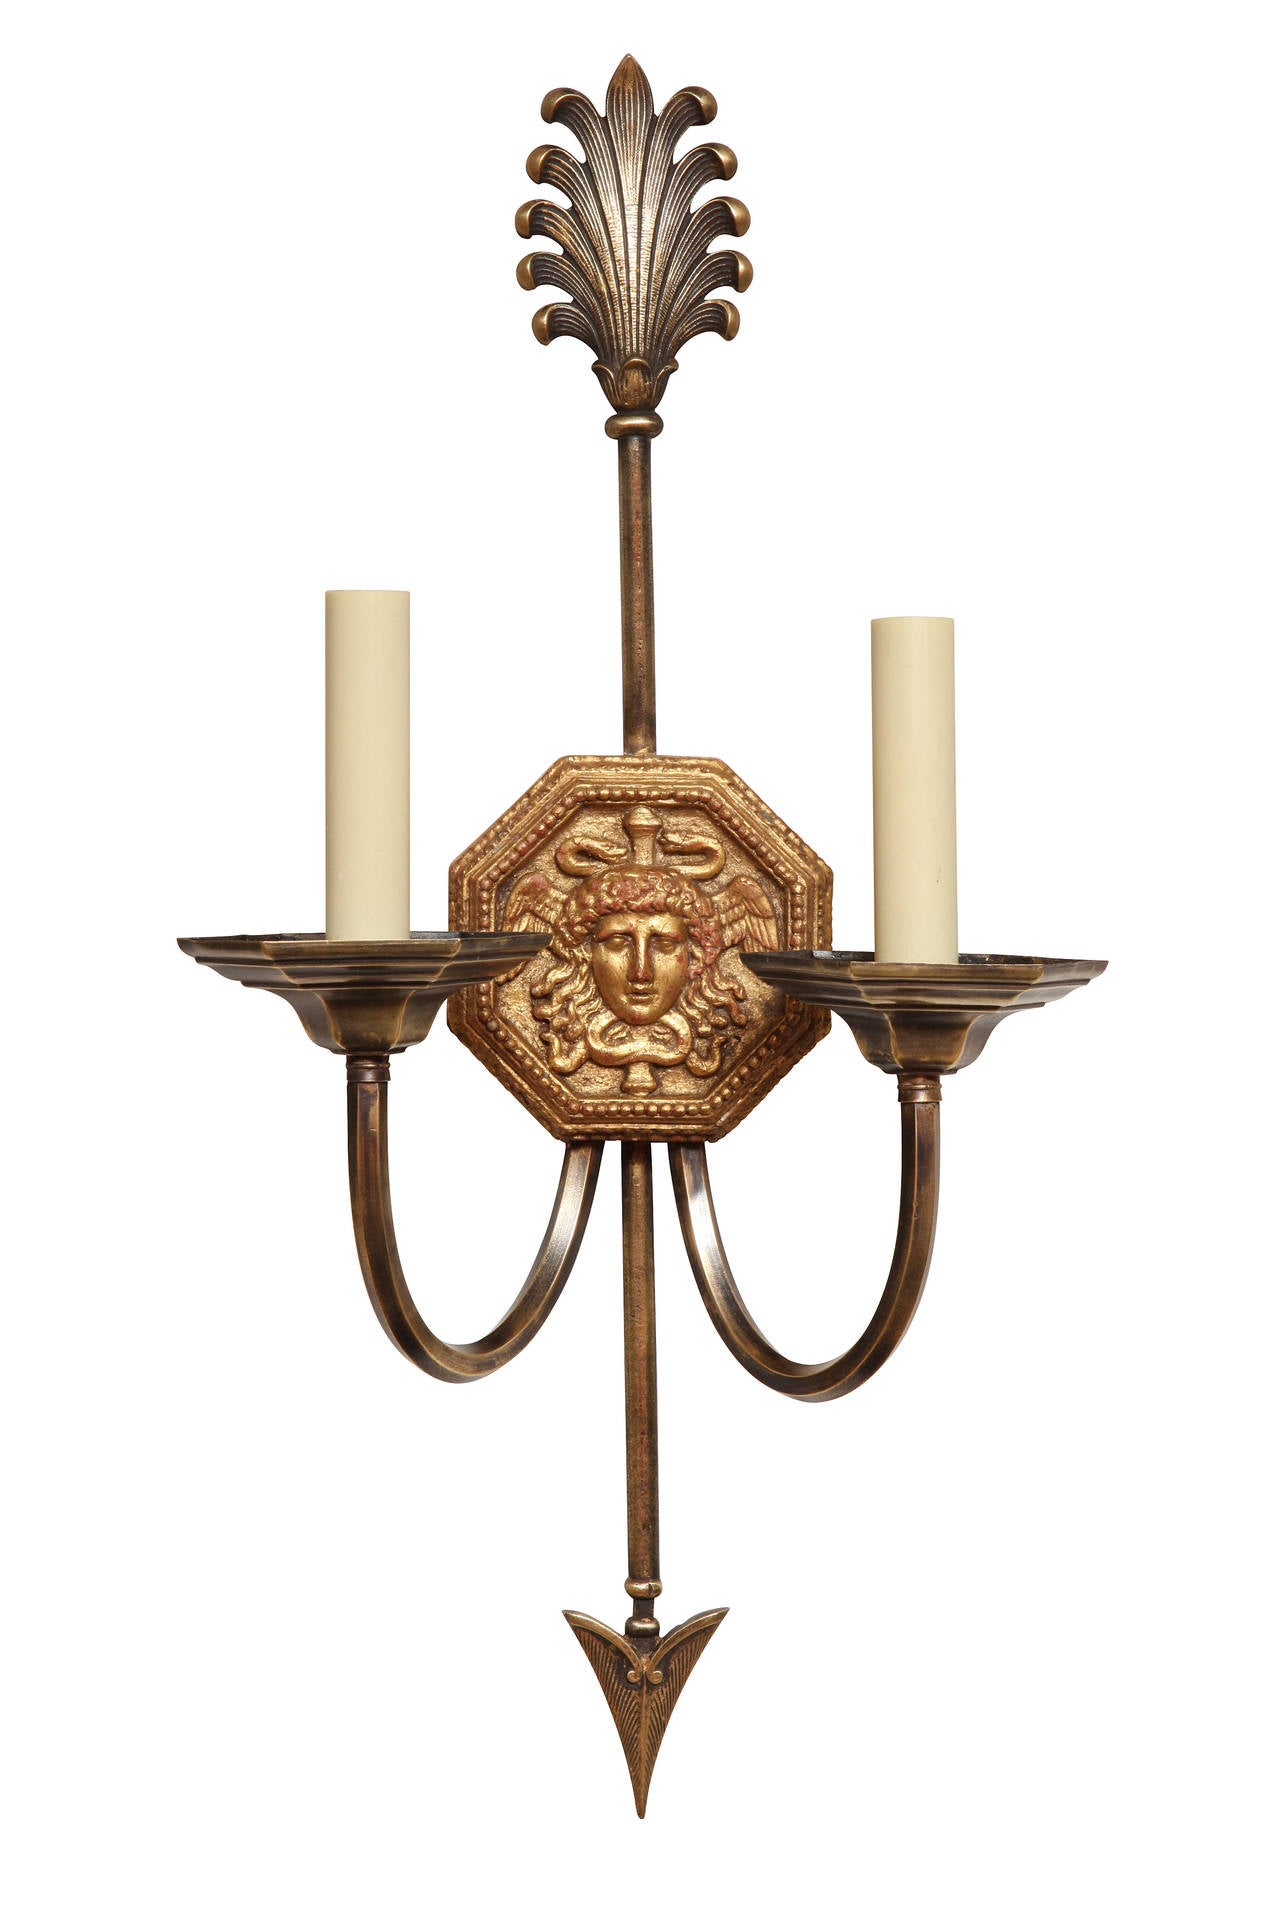 A pair of Caldwell two light Empire style sconces with octagonal carved and gilt backplates having classical portrait medallion with beadwork frame. The vertical back in the form of an arrow. Each upswept arm with an octagonal bobeche.